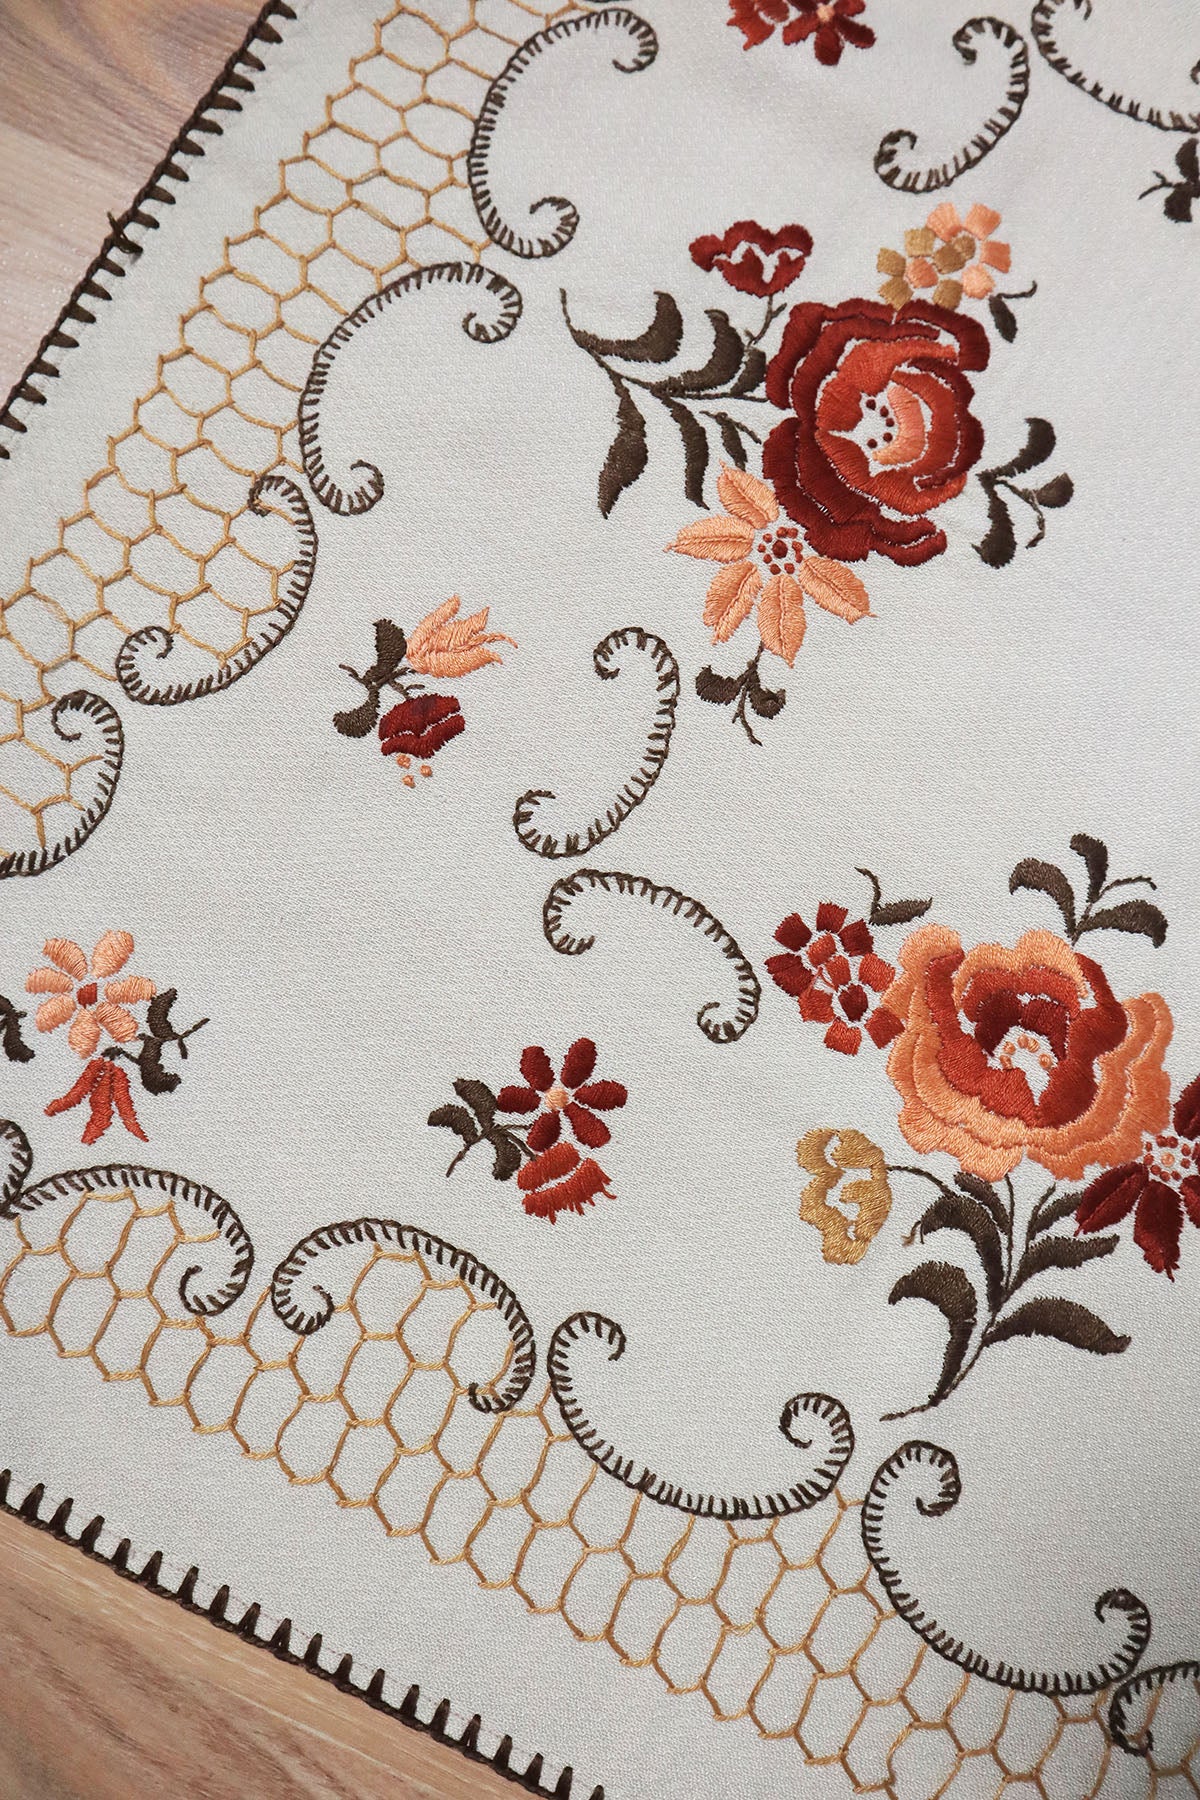 Vintage Tablecloth Floral Embroidery